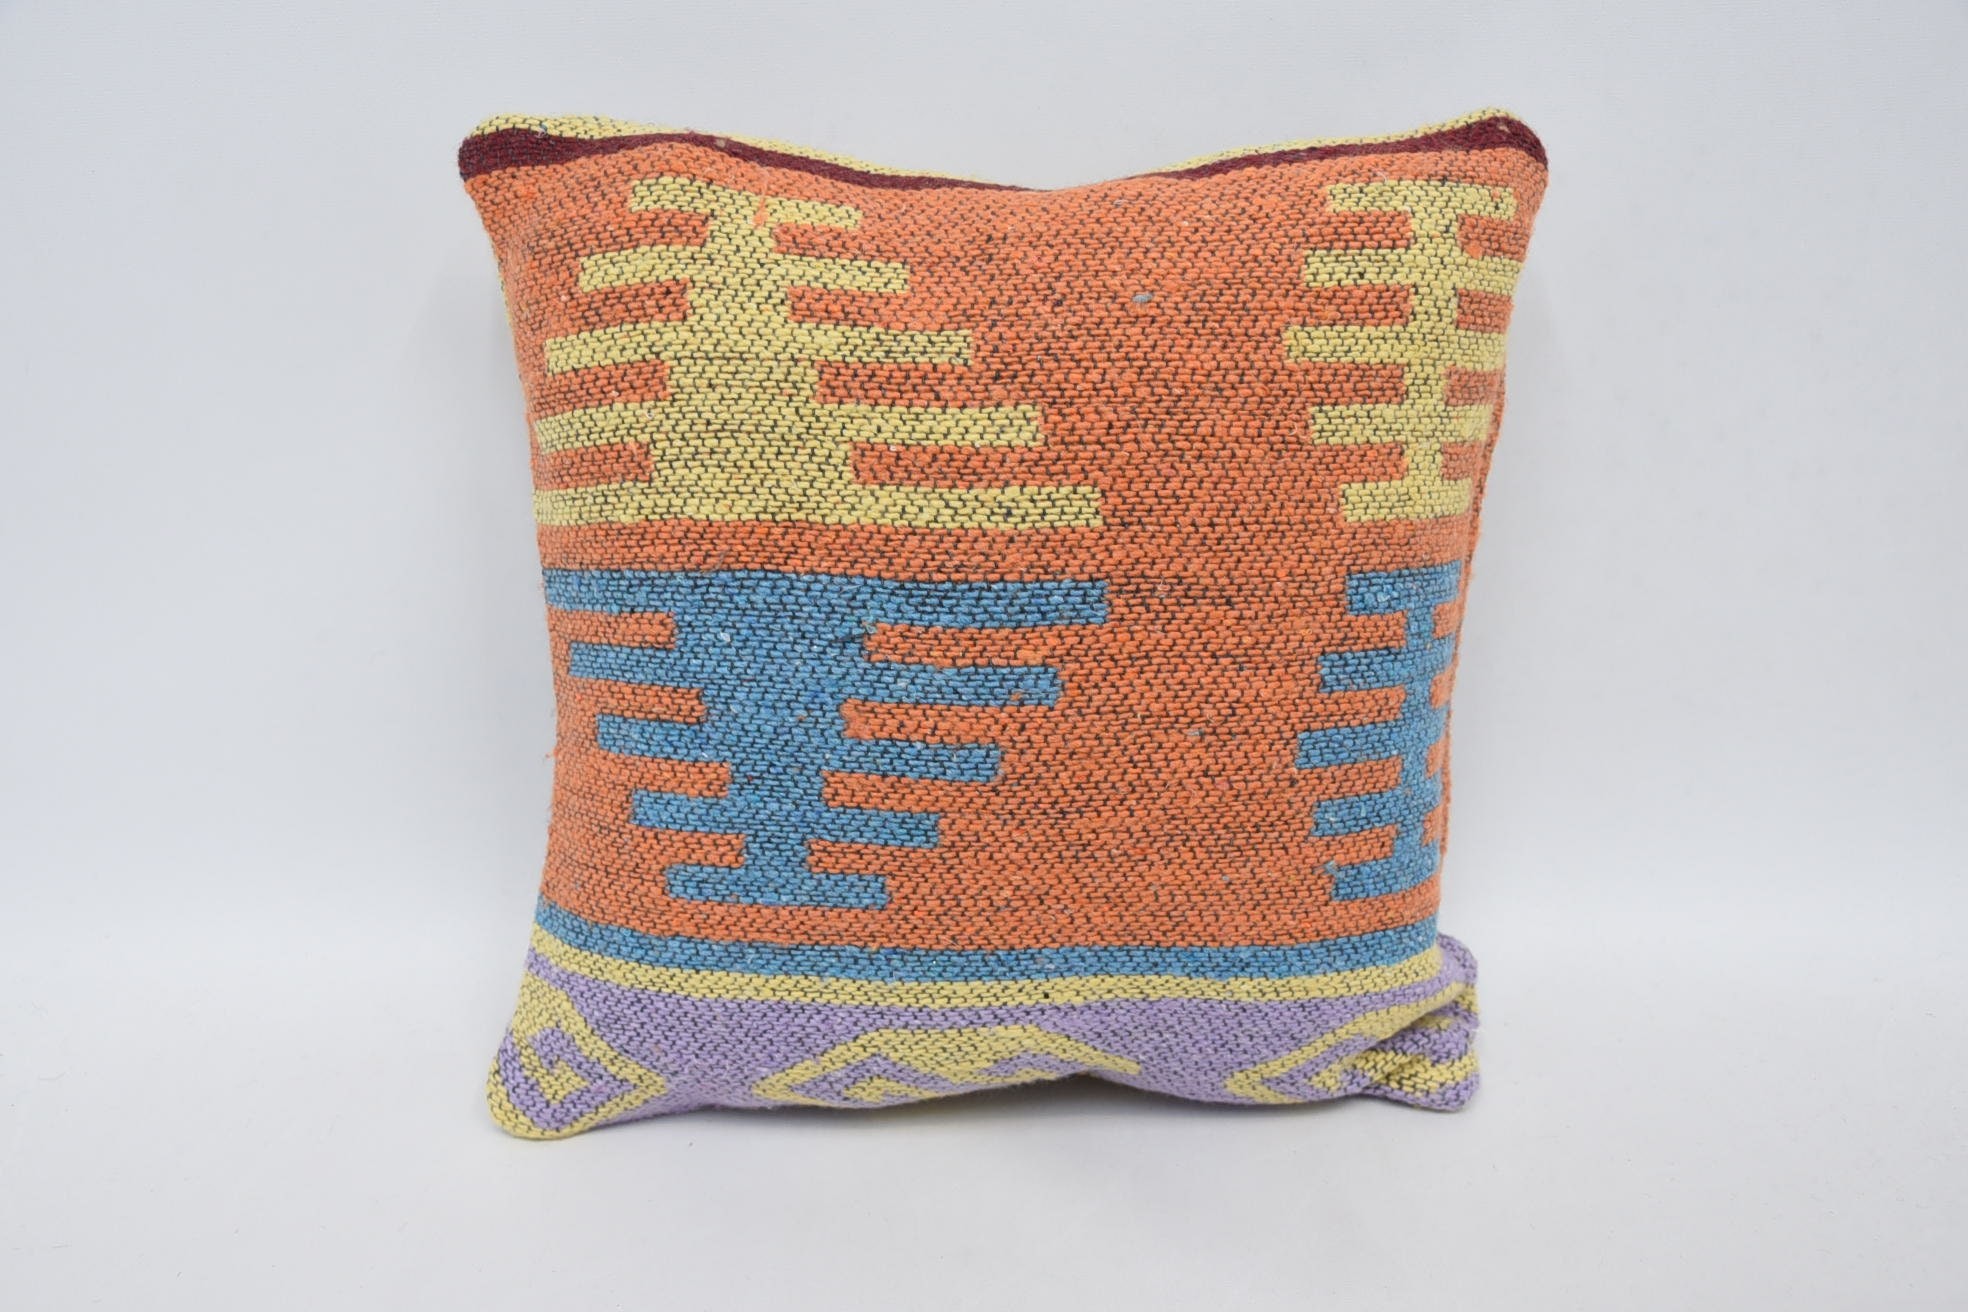 Pillow for Couch, Vintage Kilim Throw Pillow, Kilim Pillow Cover, 12"x12" Orange Pillow Case, Bed Cushion, Couch Pillow Cover